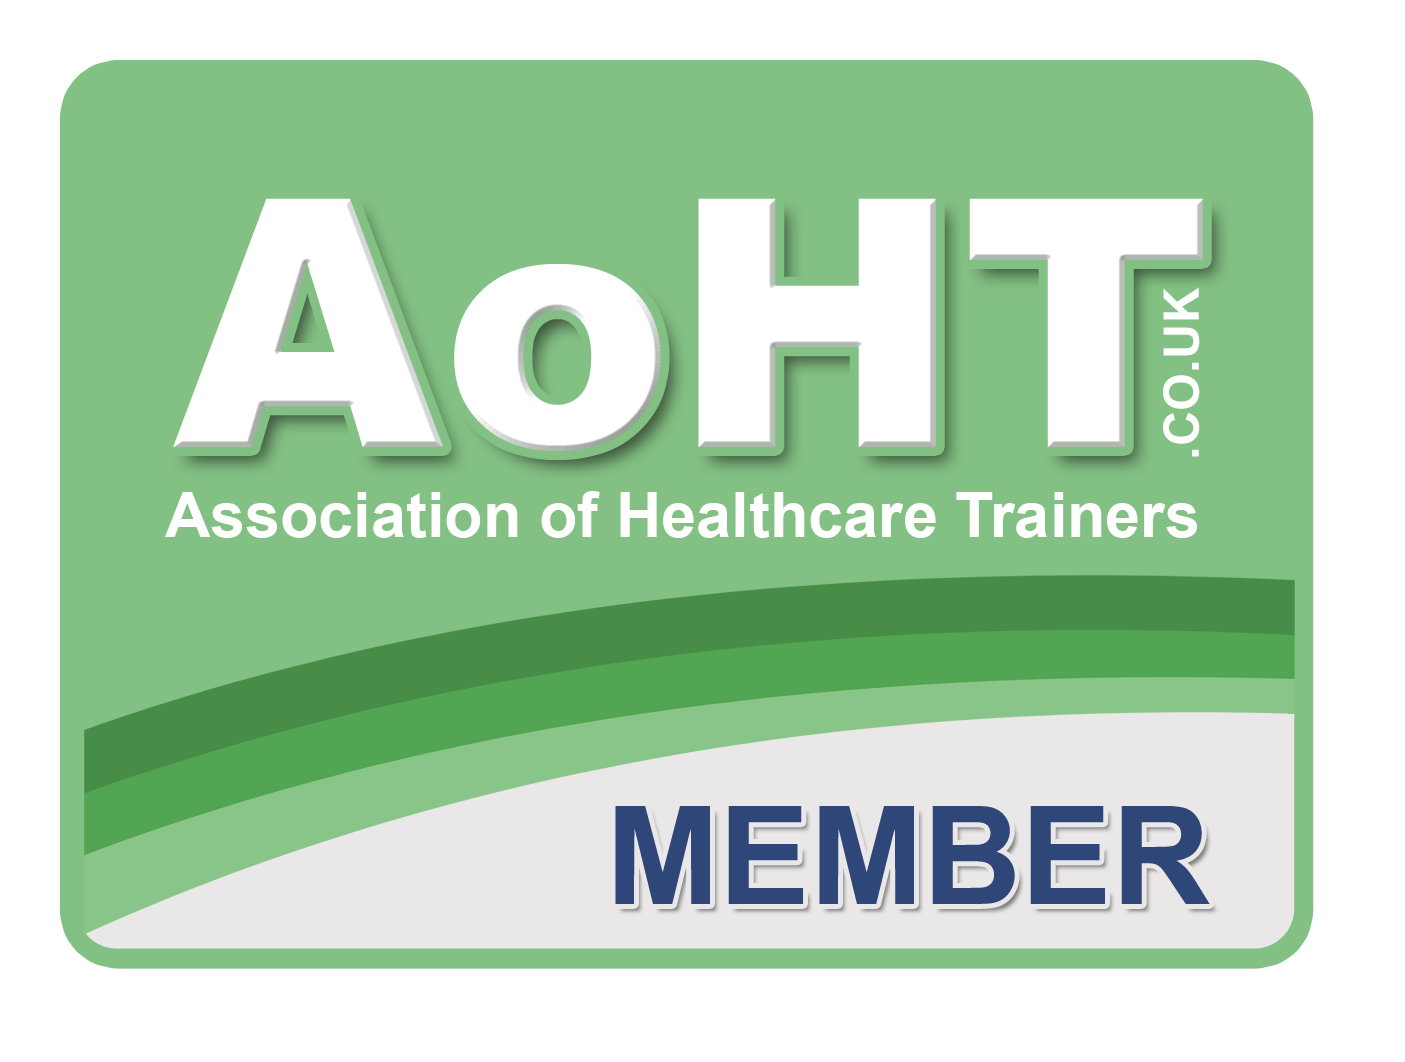 Association of Healthcare Trainers